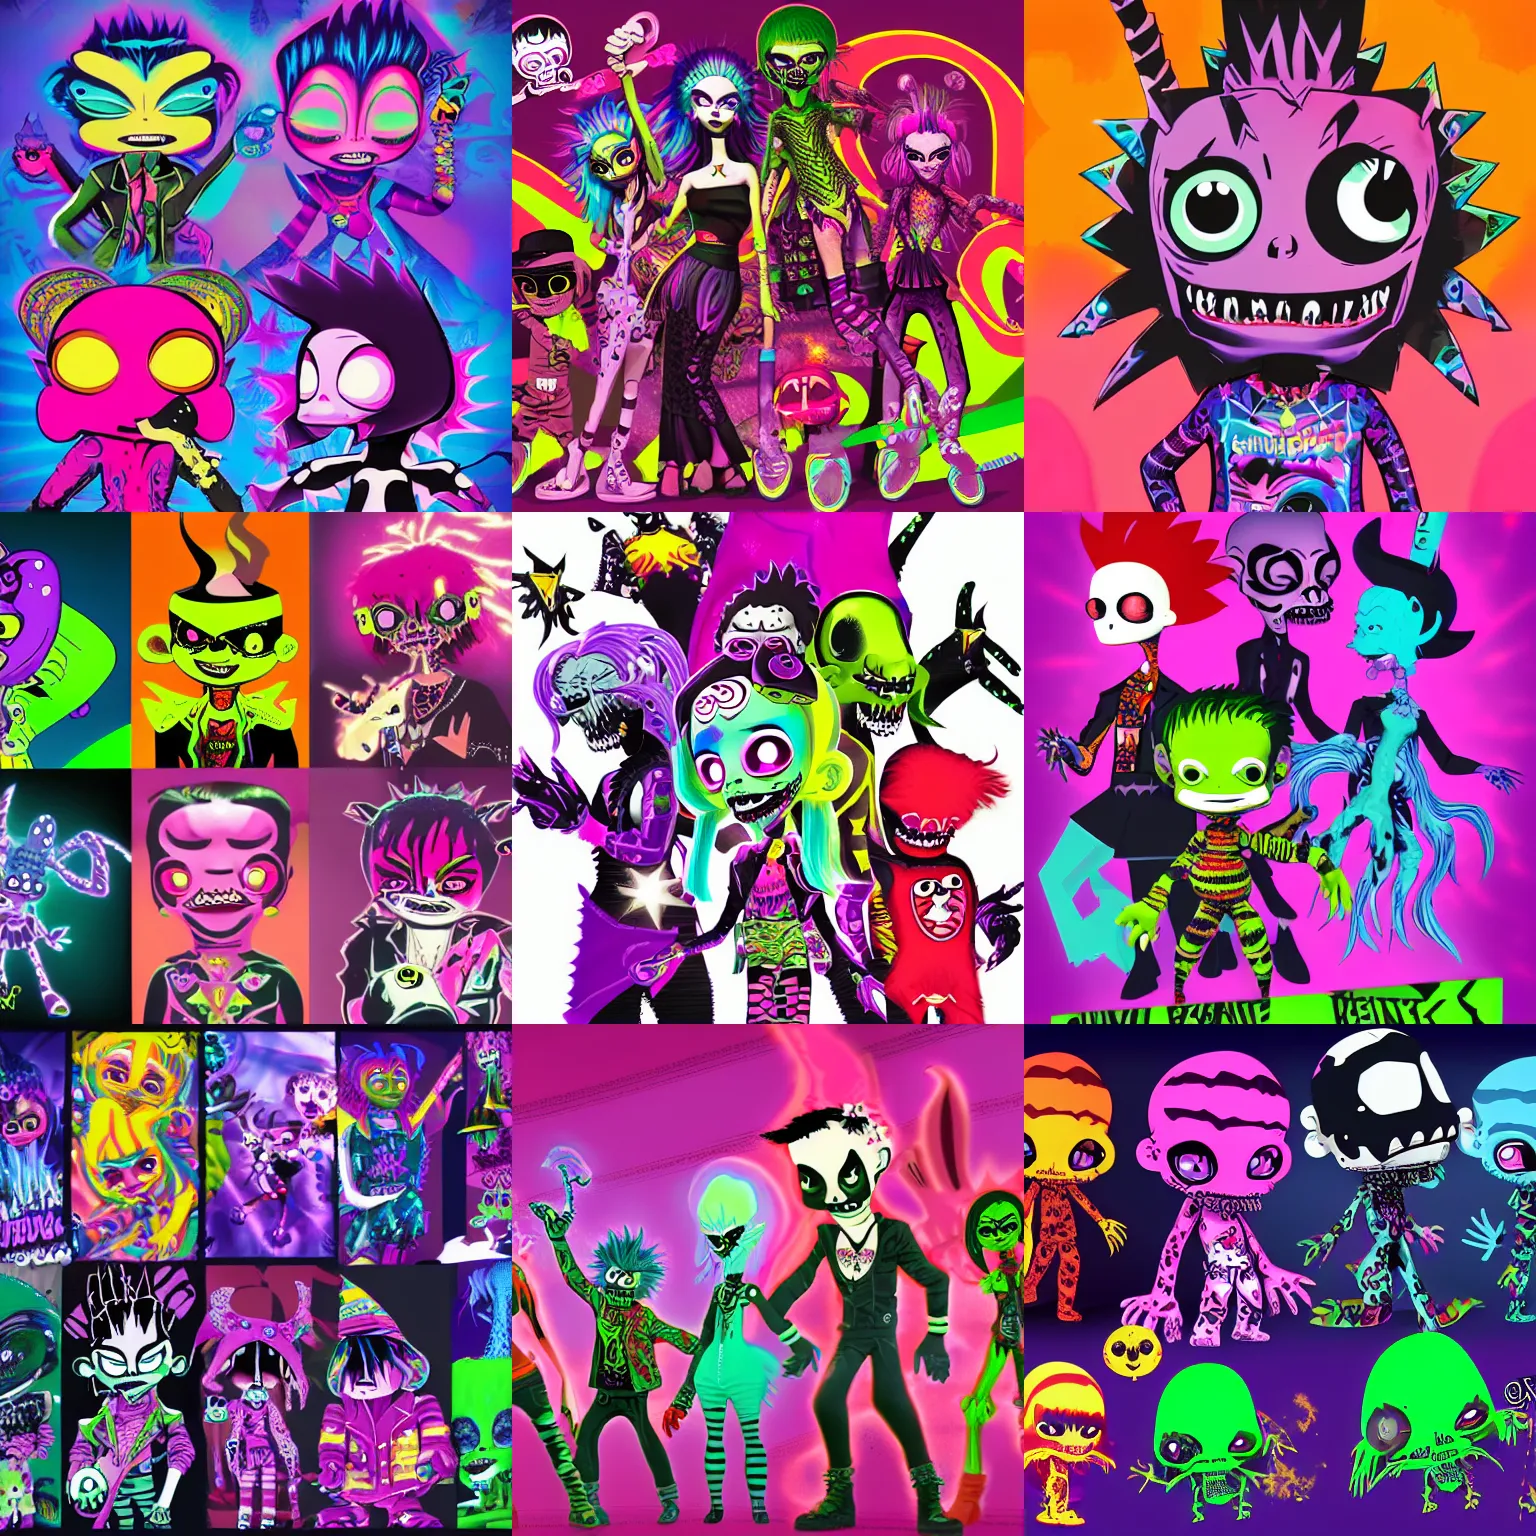 Prompt: CGI lisa frank gothic punk glow in the dark vampiric rockstar vampire squid concept character designs of various shapes and sizes by genndy tartakovsky and the creators of fret nice at pieces interactive and psychonauts by doublefines tim shafer being overseen by Jamie Hewlett from gorillaz for splatoon by nintendo